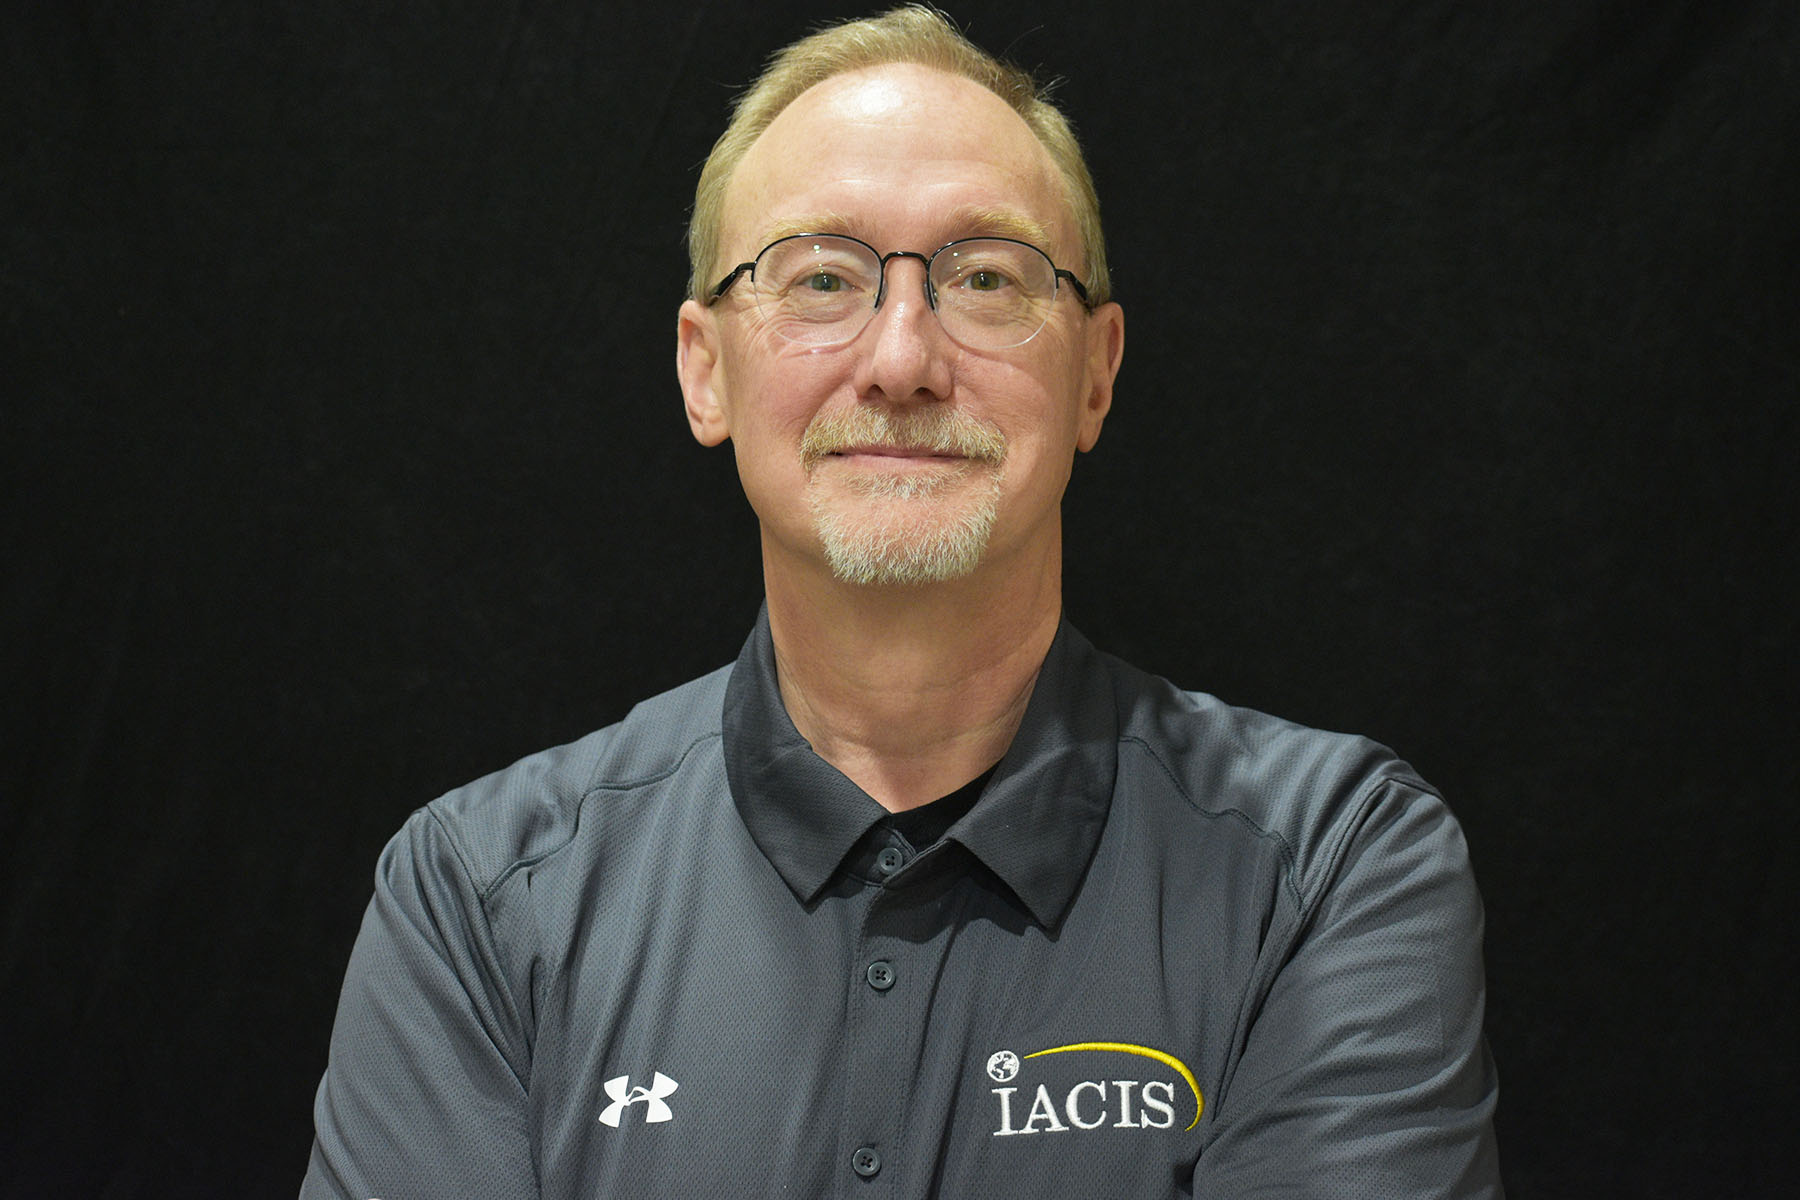 Dr. Elrick has helped IACIS offer digital forensics training around world for more than 30 years.